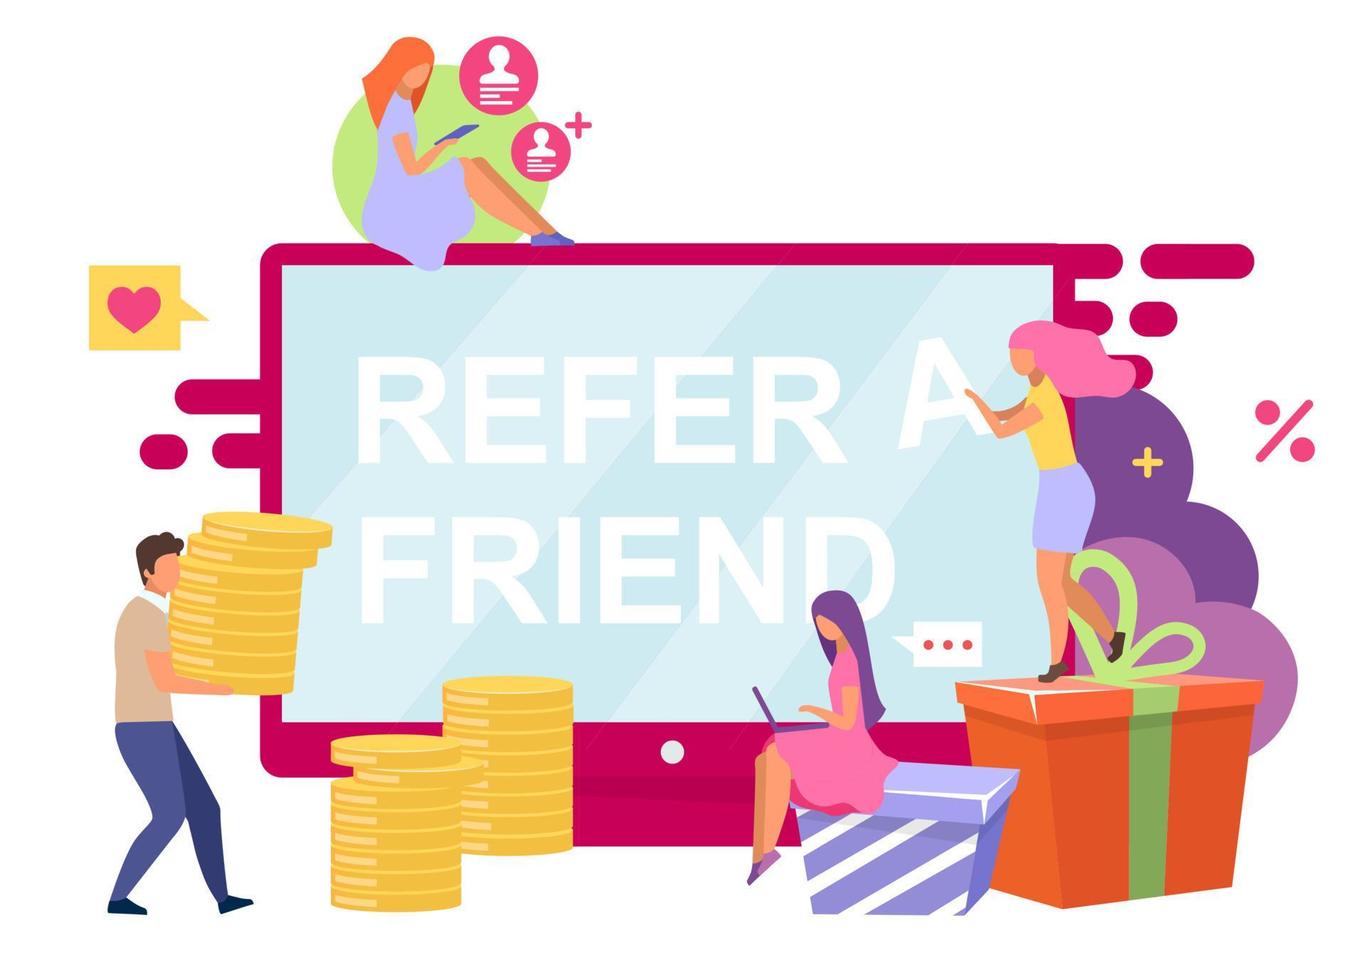 Referred customers flat vector illustration. Refer a friend cartoon concept isolated on white background. Referral program, bonuses, rewards. Influencer and viral marketing. Social sharing